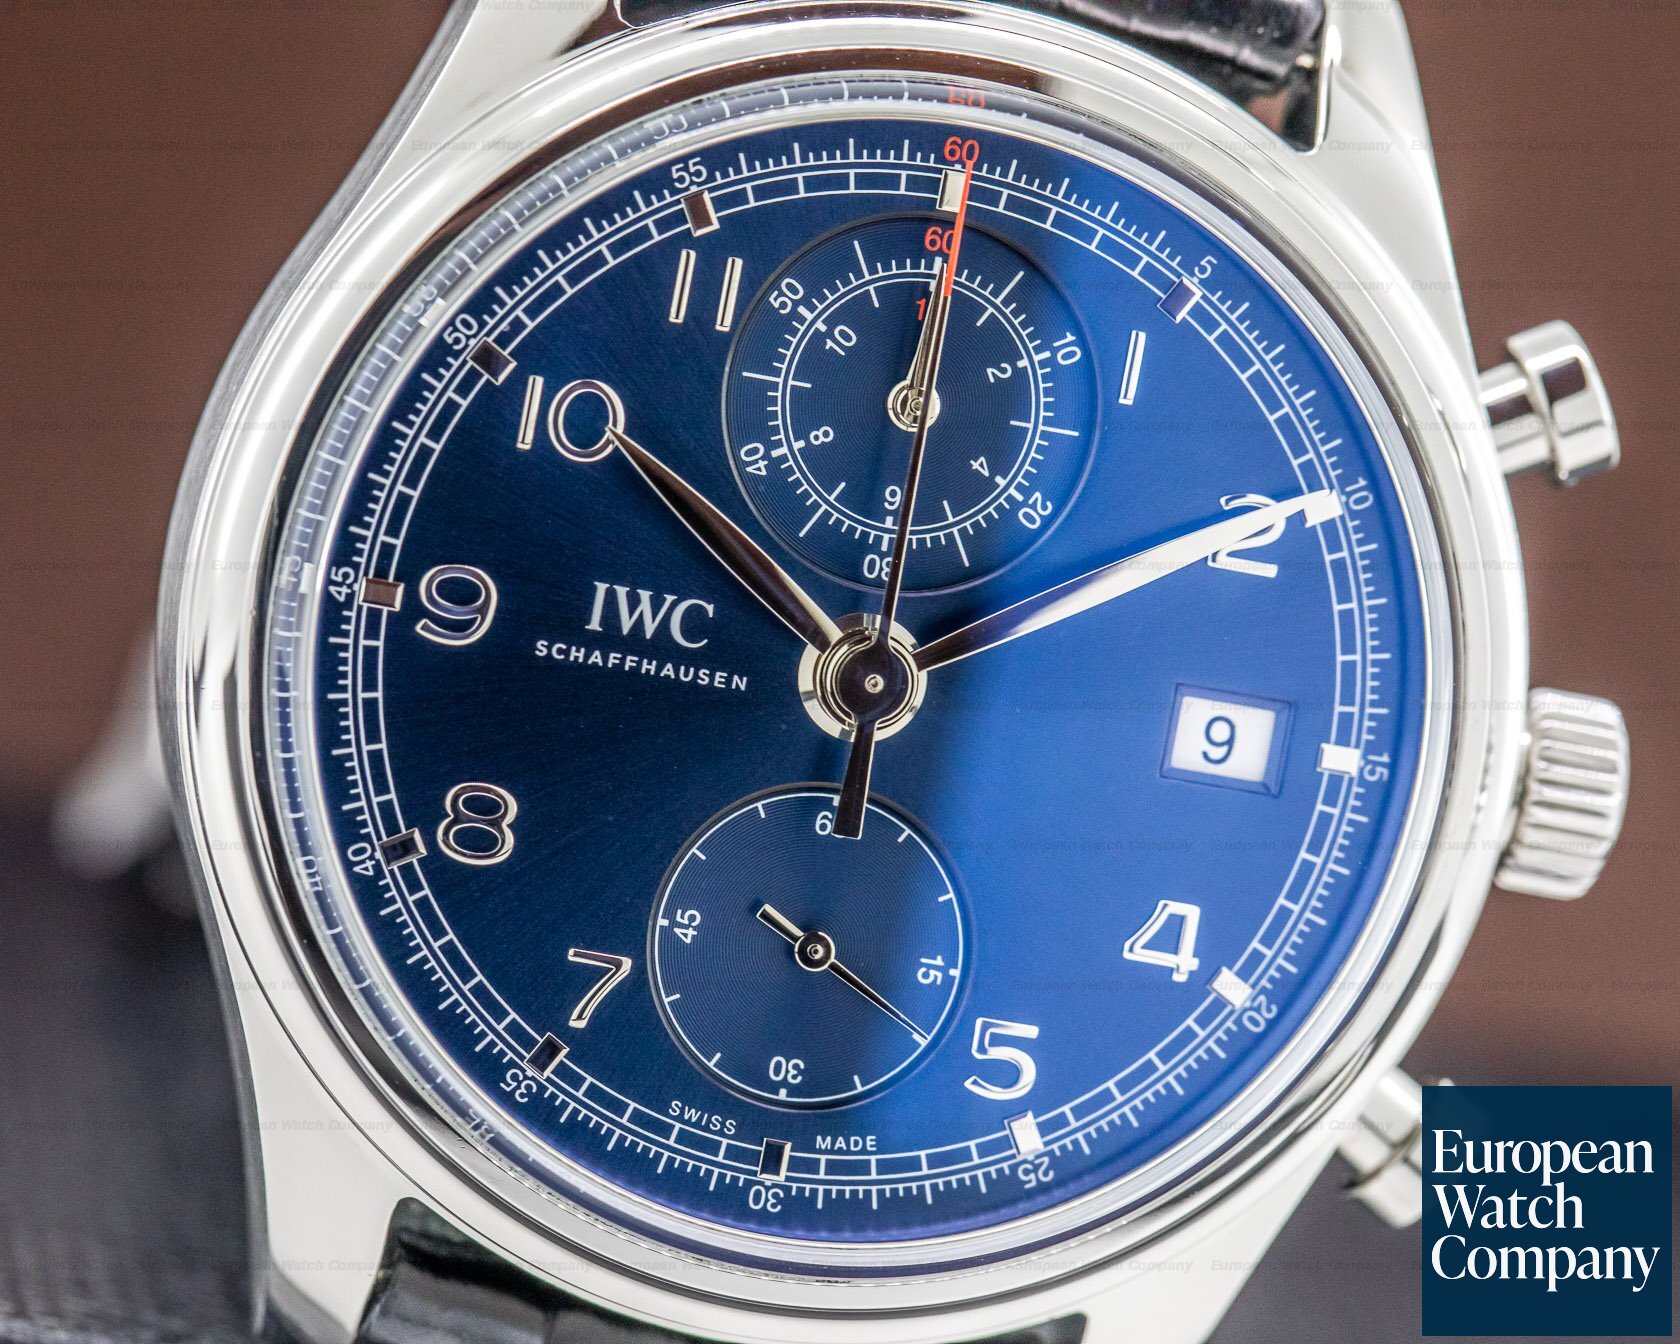 IWC Portuguese Chronograph Classic SS Laureus Limited Edition Ref. IW390406